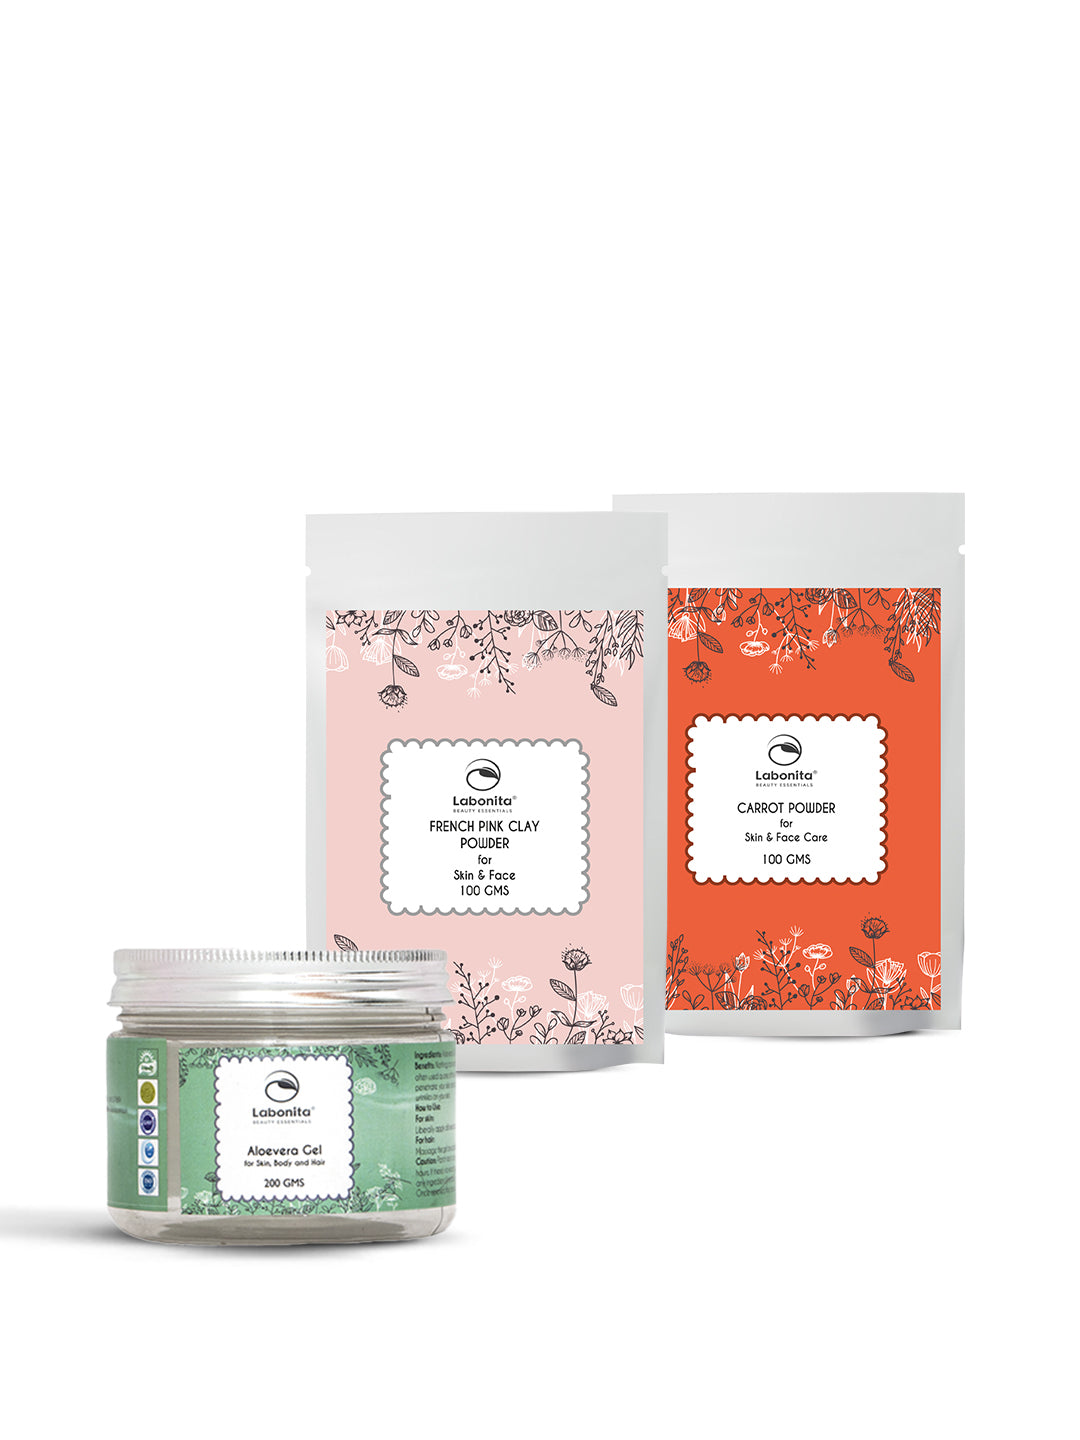 Combo Pack of Aloevera gel, French Pink Clay Powder & Carrot Powder